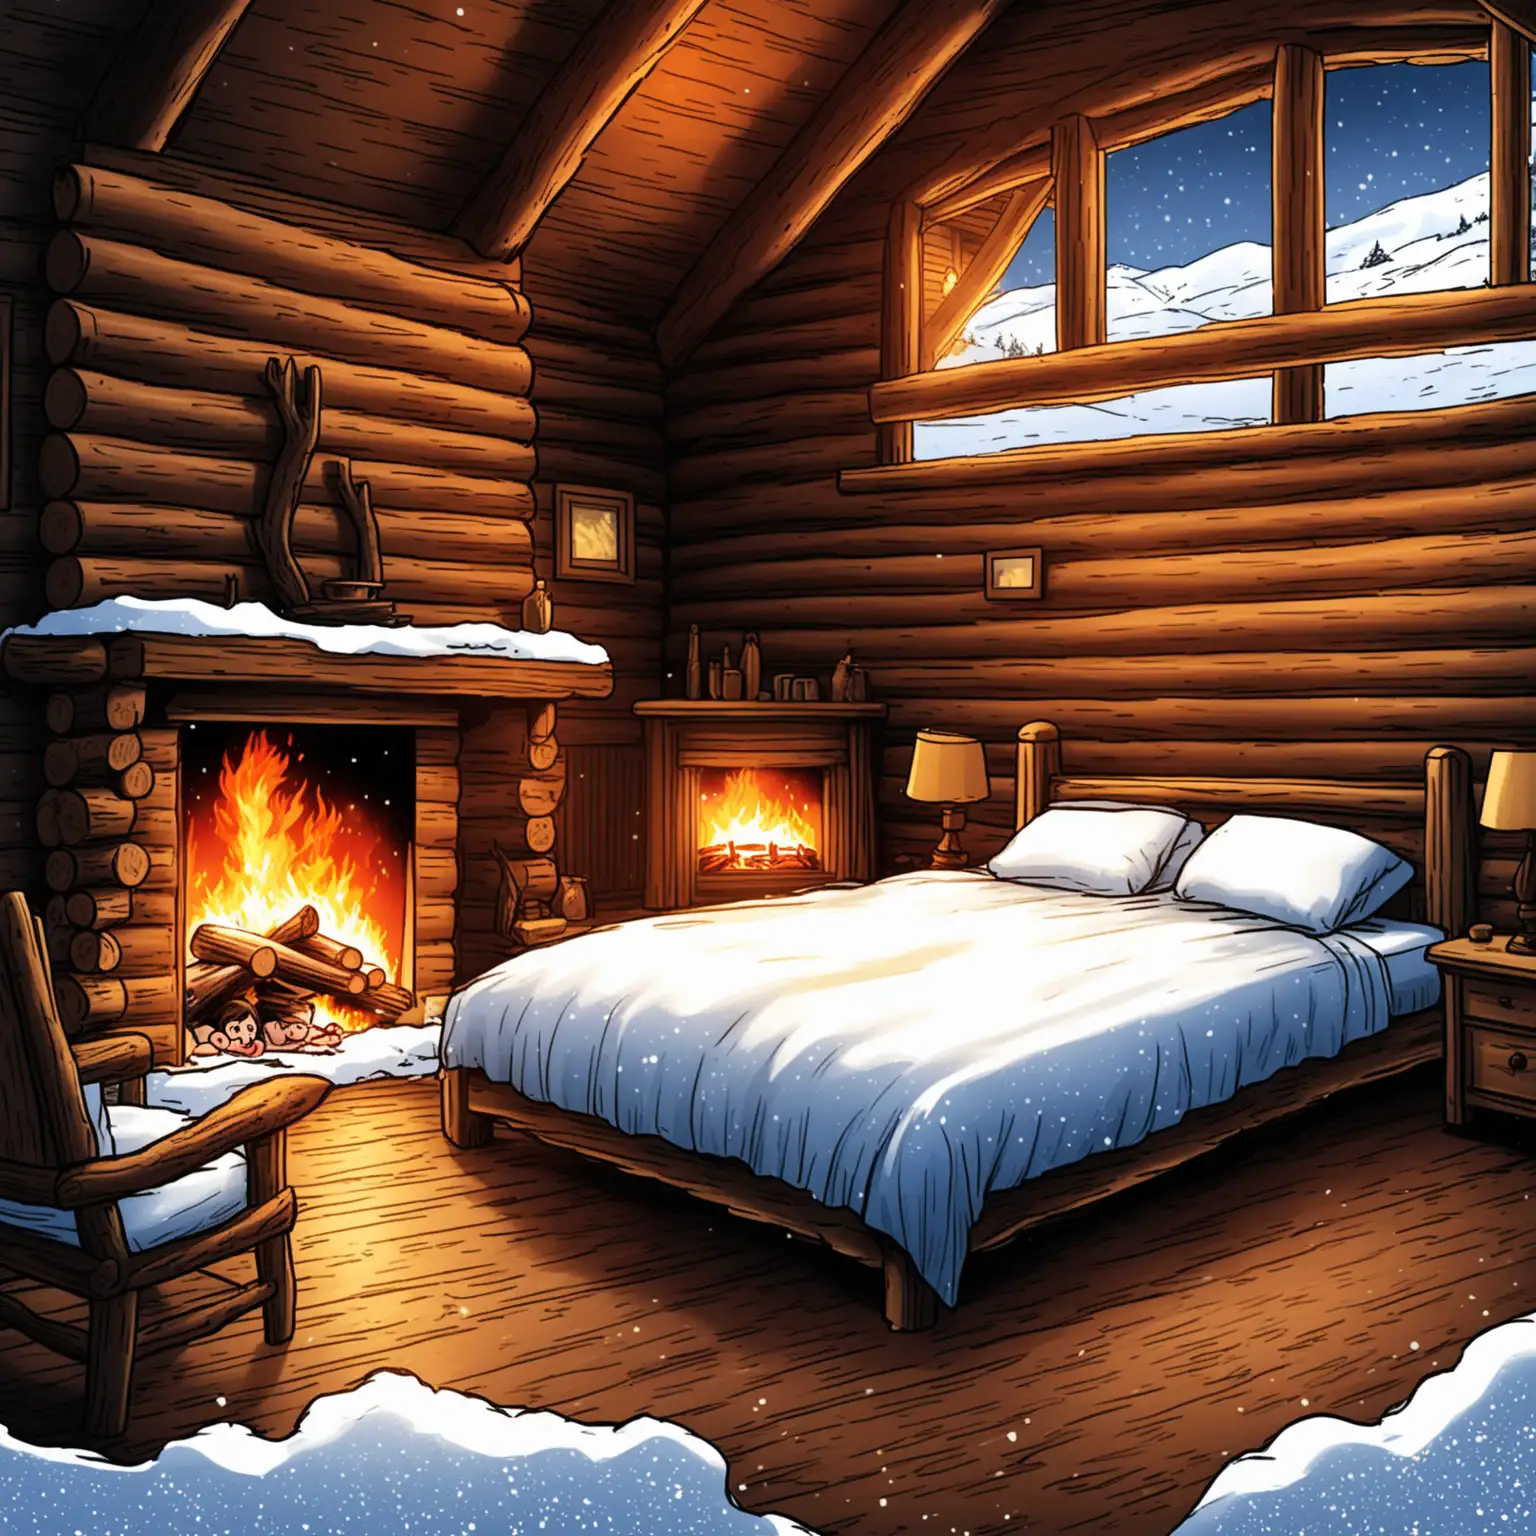 draw a comic book image of inside of a cosy log cabin that you would see on the snow fields. it has a burning fireplace  and a bed with blankets , timber floors